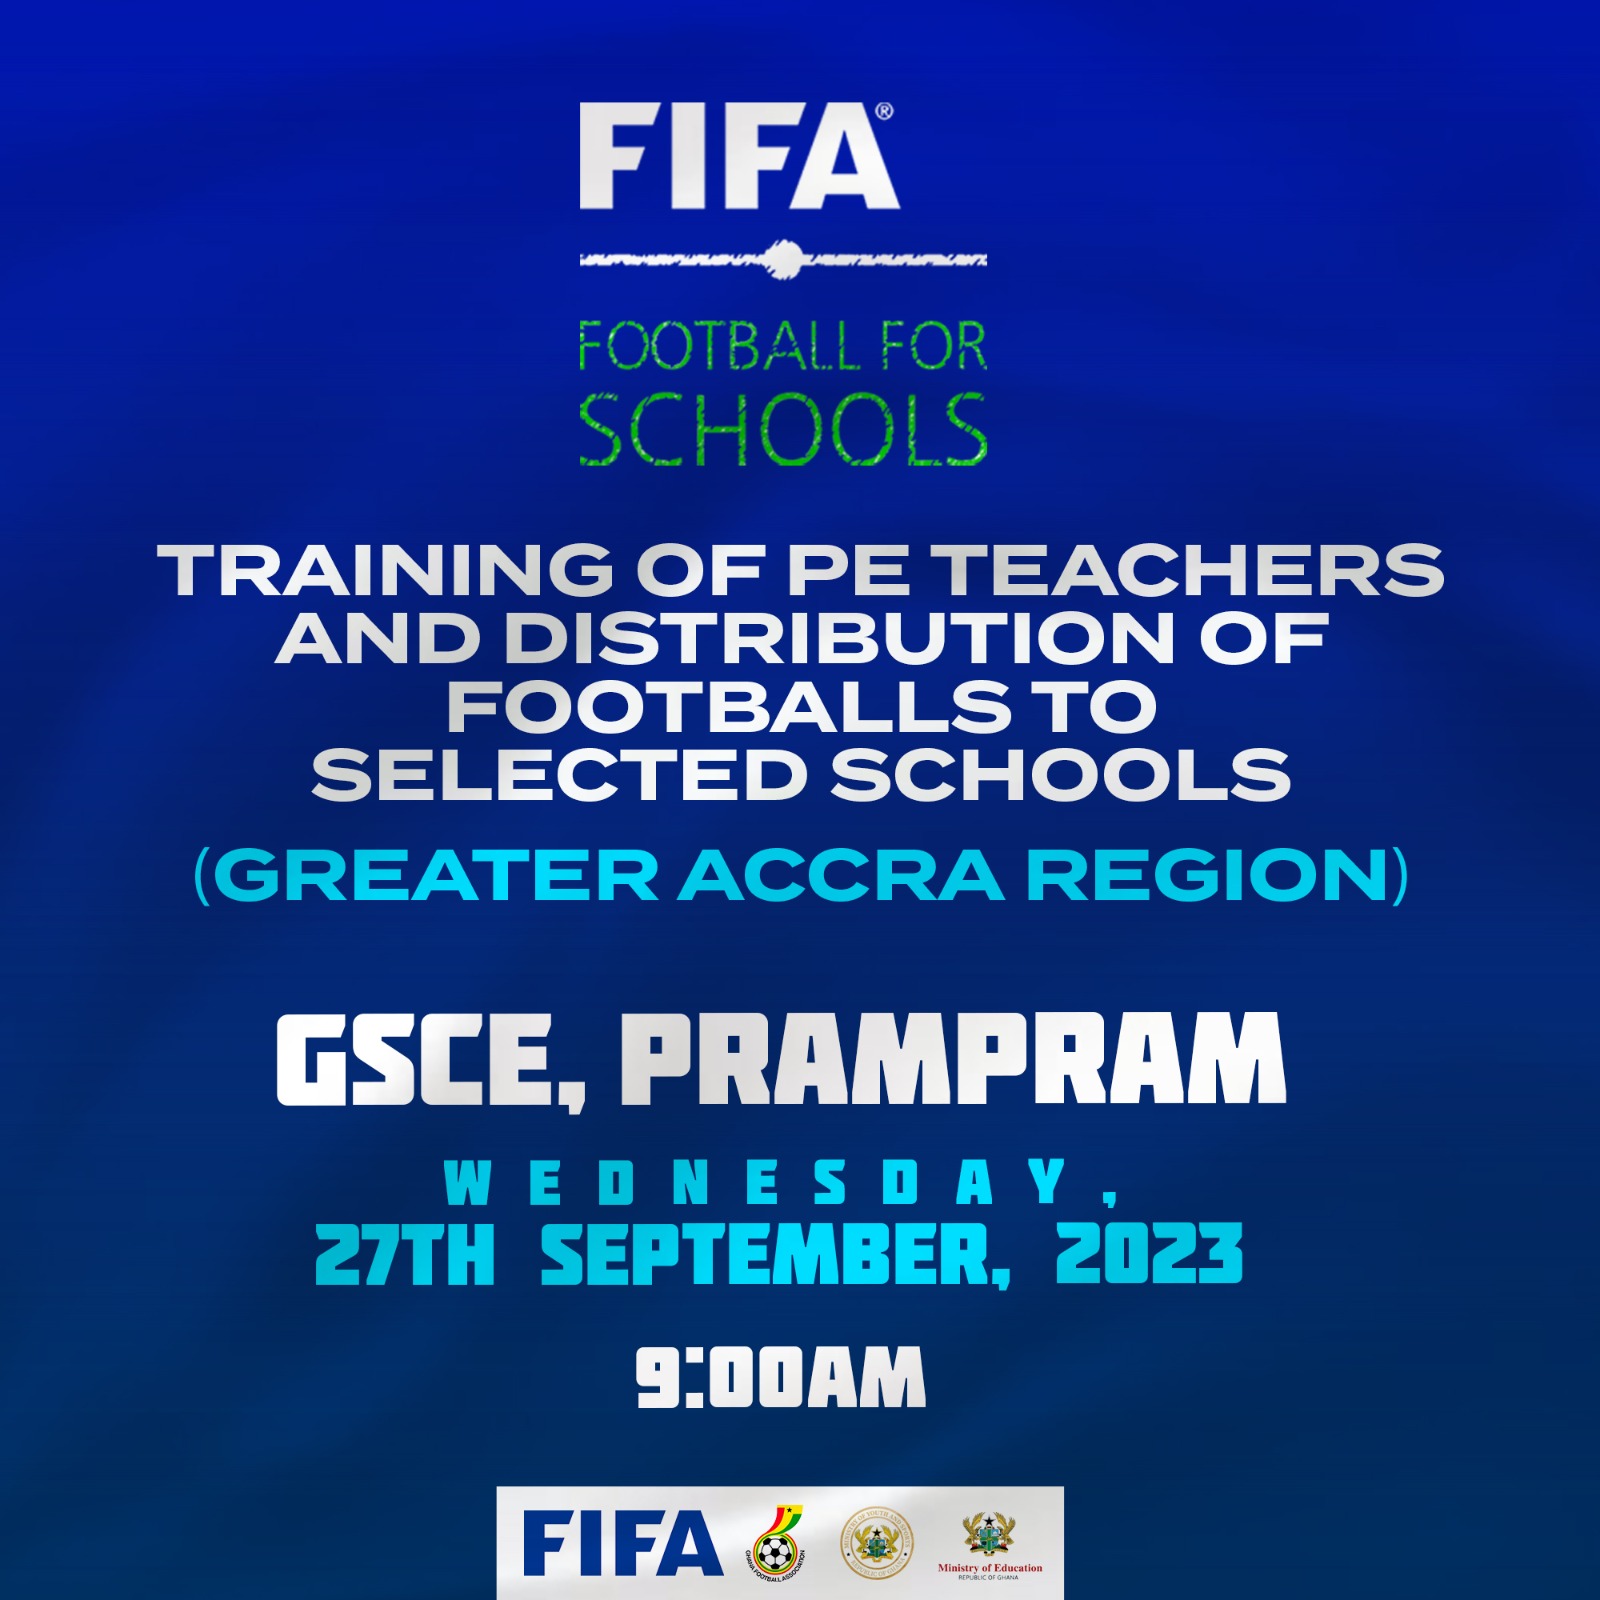 FIFA Football for Schools: Footballs to be distributed to selected schools in Greater Accra